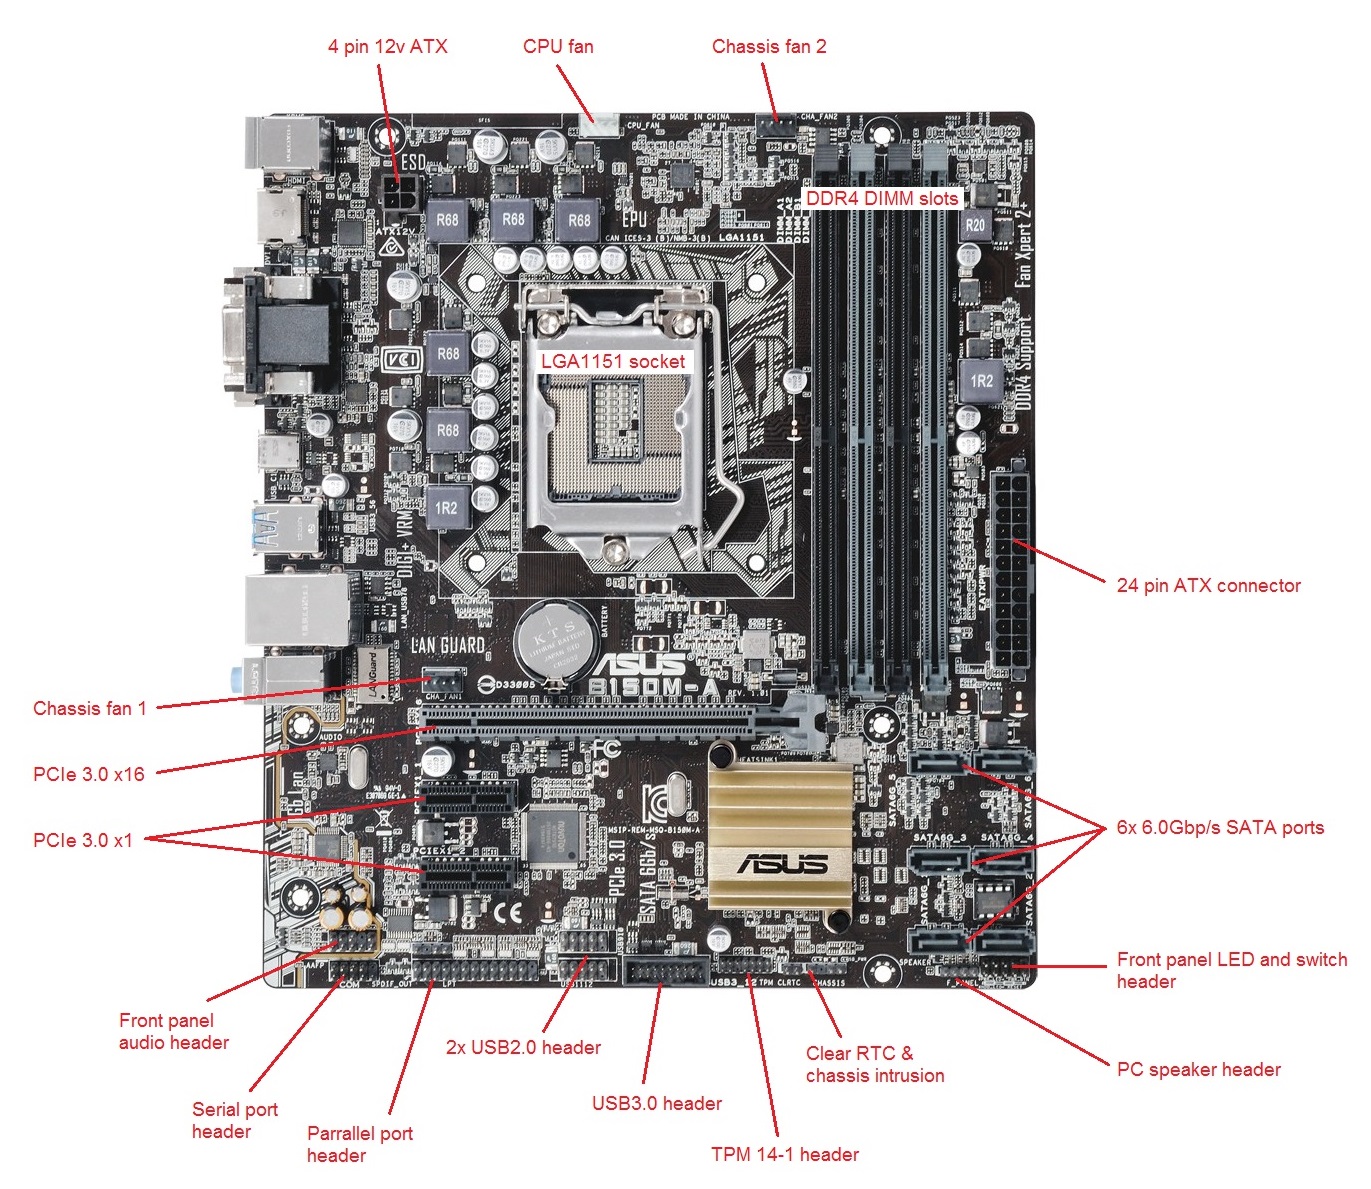 BOAMOT-480 - Stone / Asus B150M-A - Motherboard Specification, Layout and Manual - Stone ...